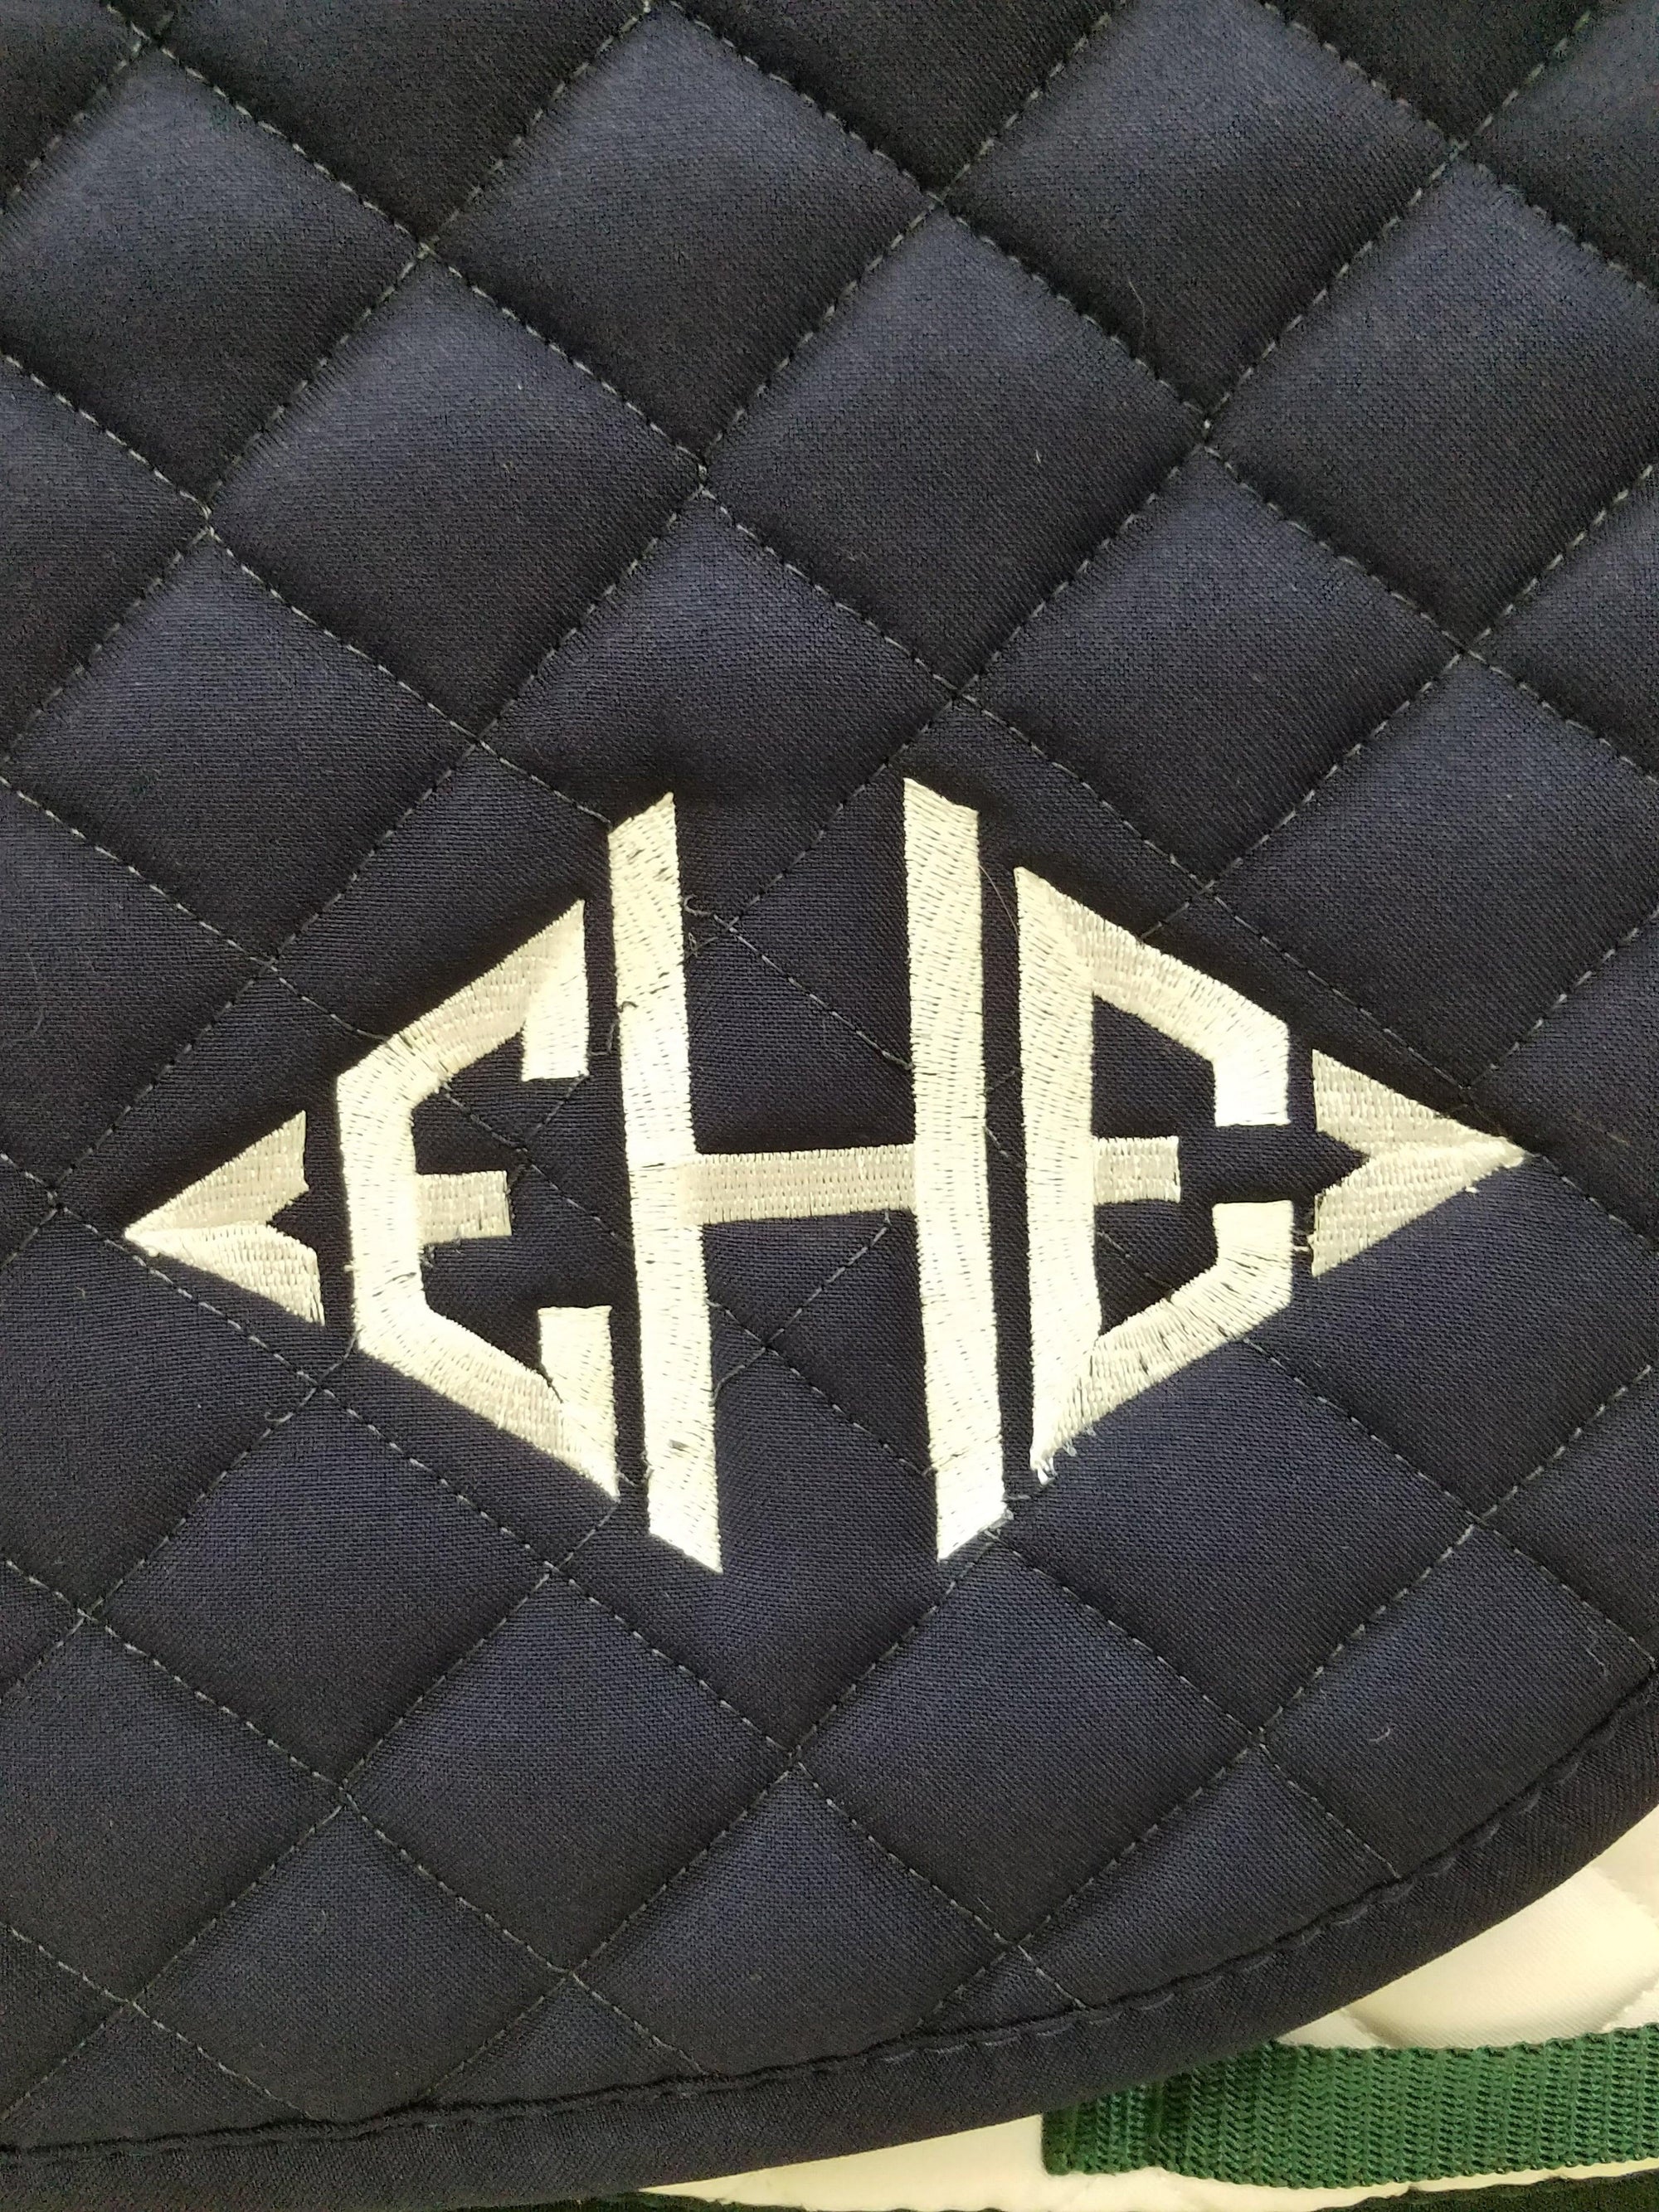 Customizable All Purpose Saddle Pads- Team Patch or Monogram - Wilsun Custom Horse Blankets & Fine Horse Accessories